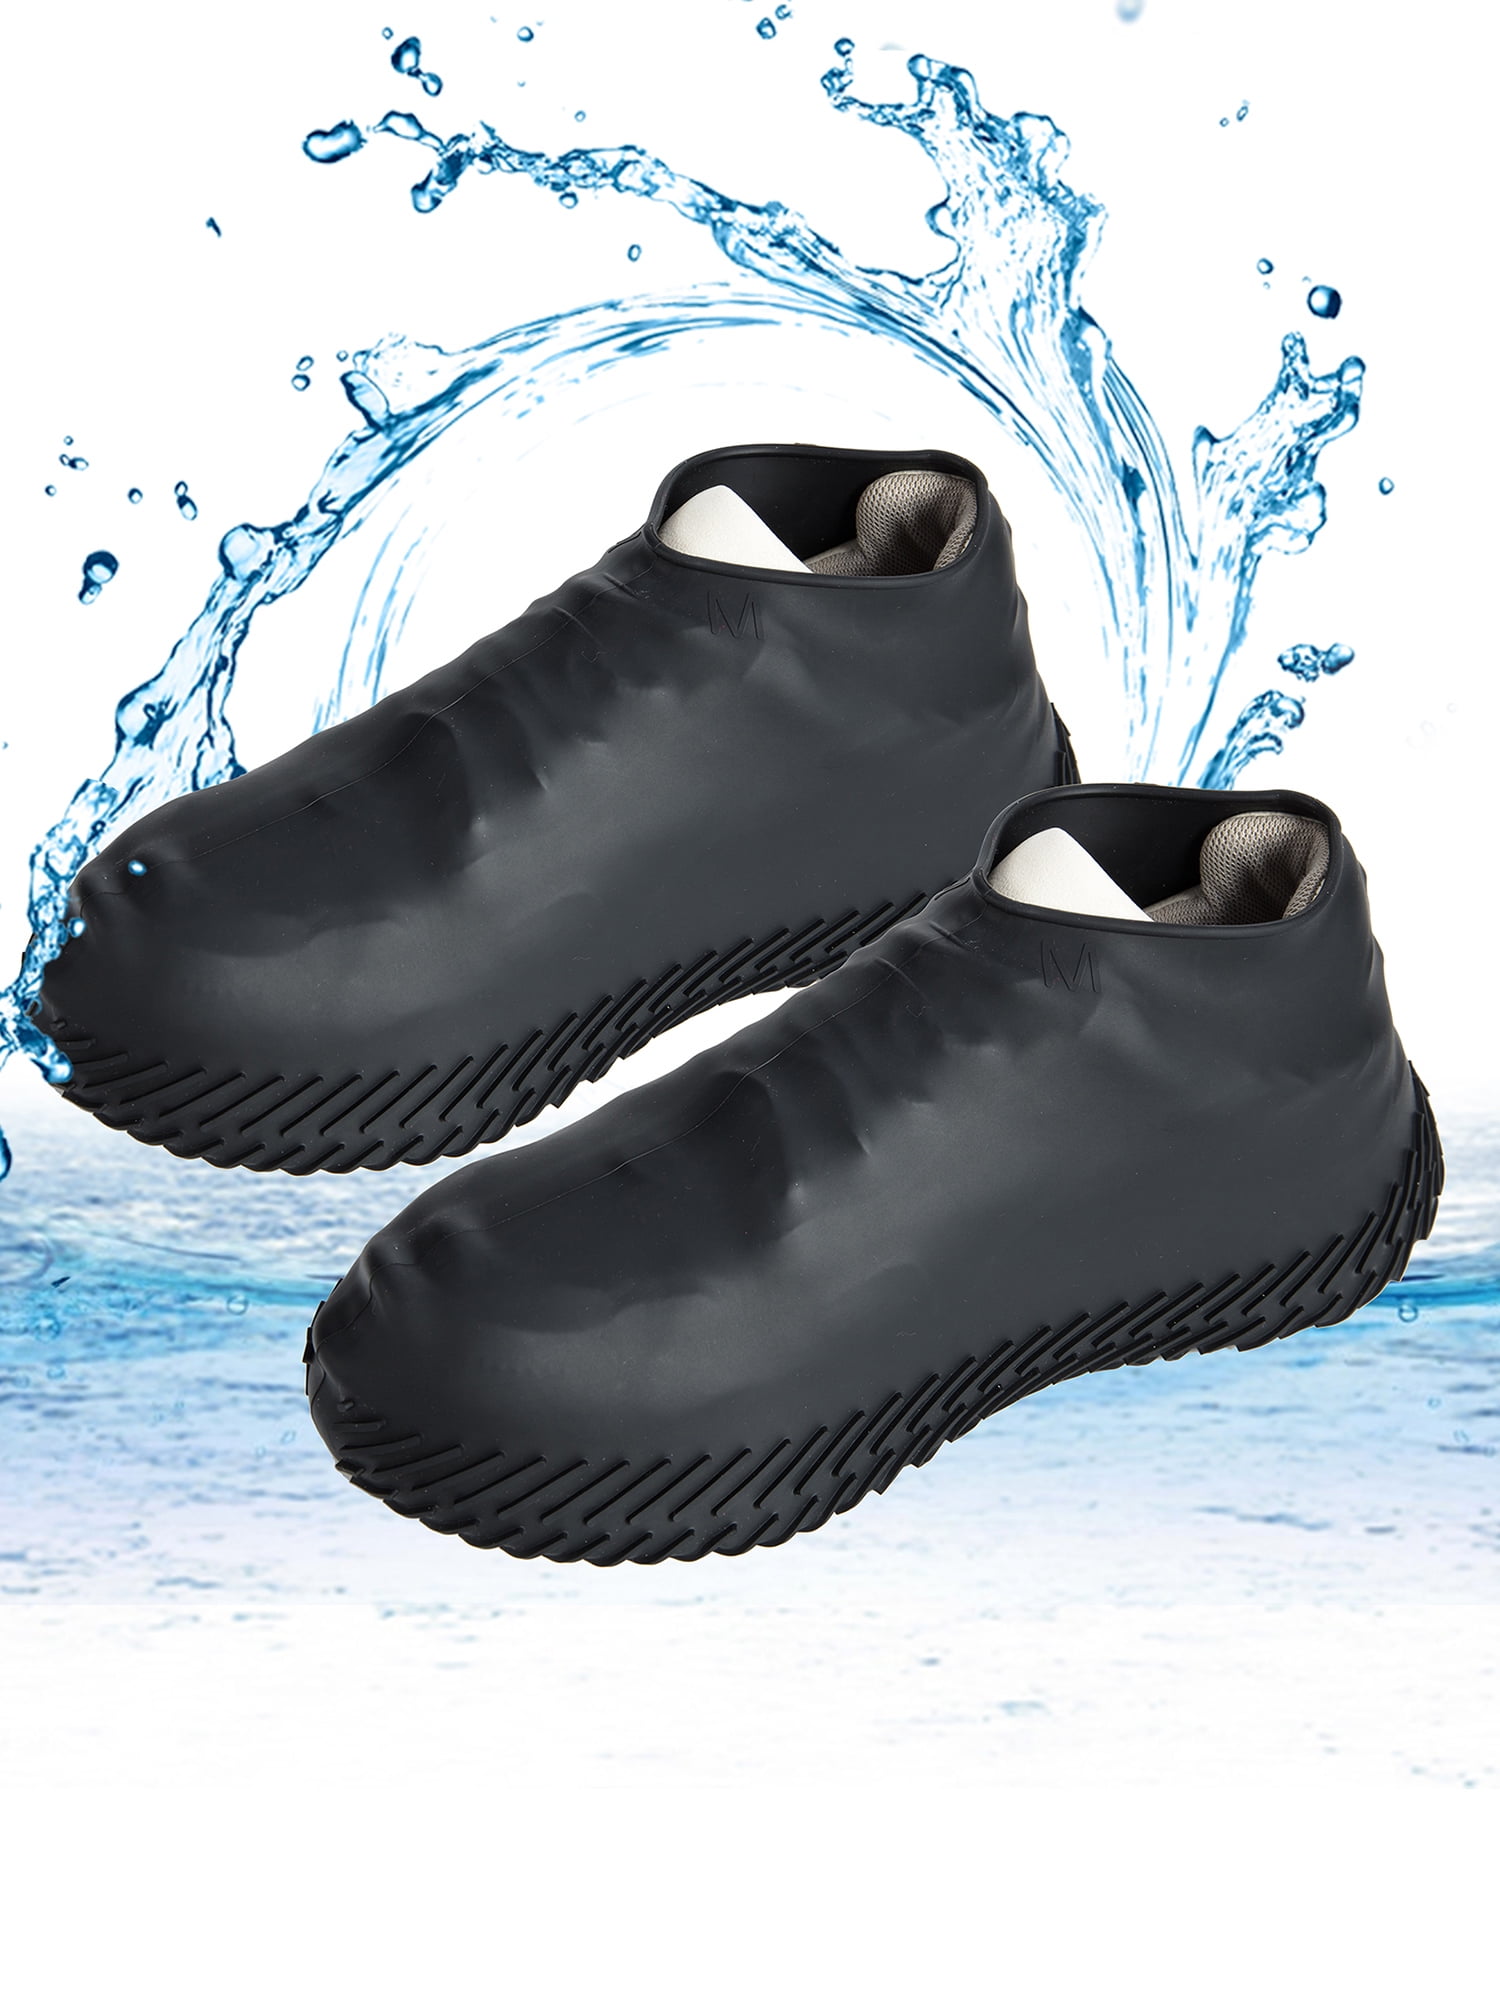 Details about   Overshoes Rain Silicone Waterproof Shoes Covers Boots Cover ProtectSK 